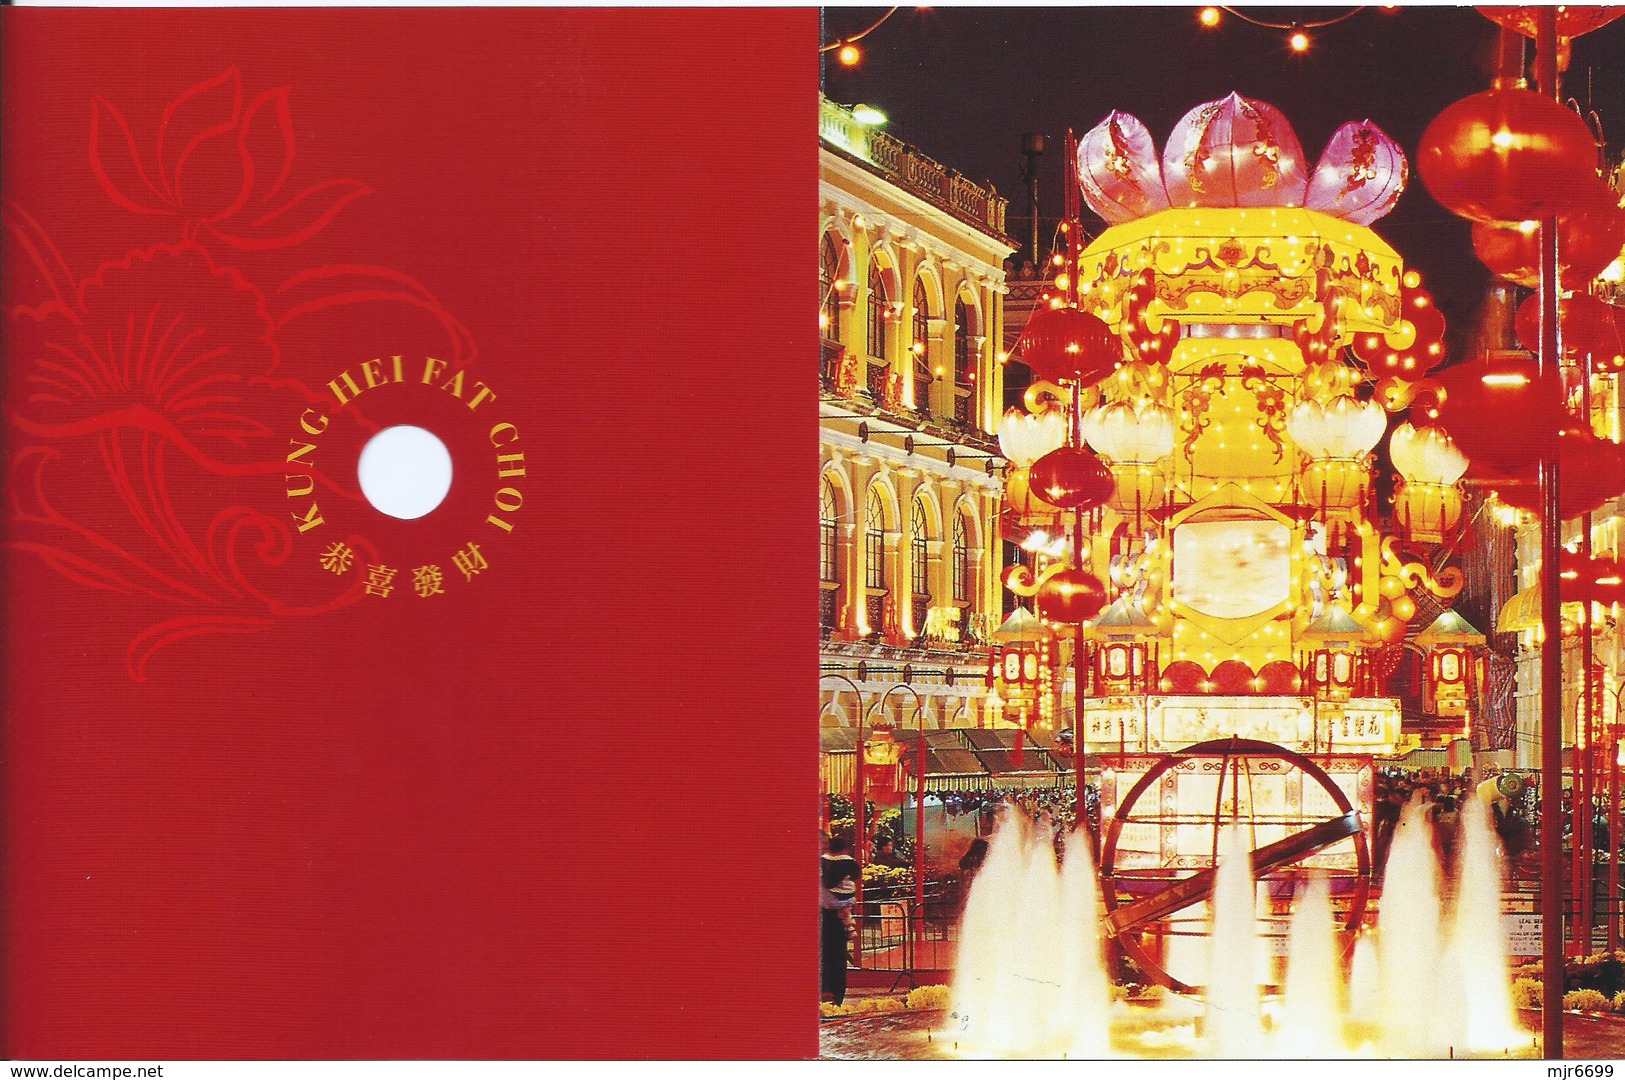 MACAU 1999 NEW YEAR GREETING CARD & POSTAGE PAID COVER, POST OFFICE CODE #BPK005 - Ganzsachen